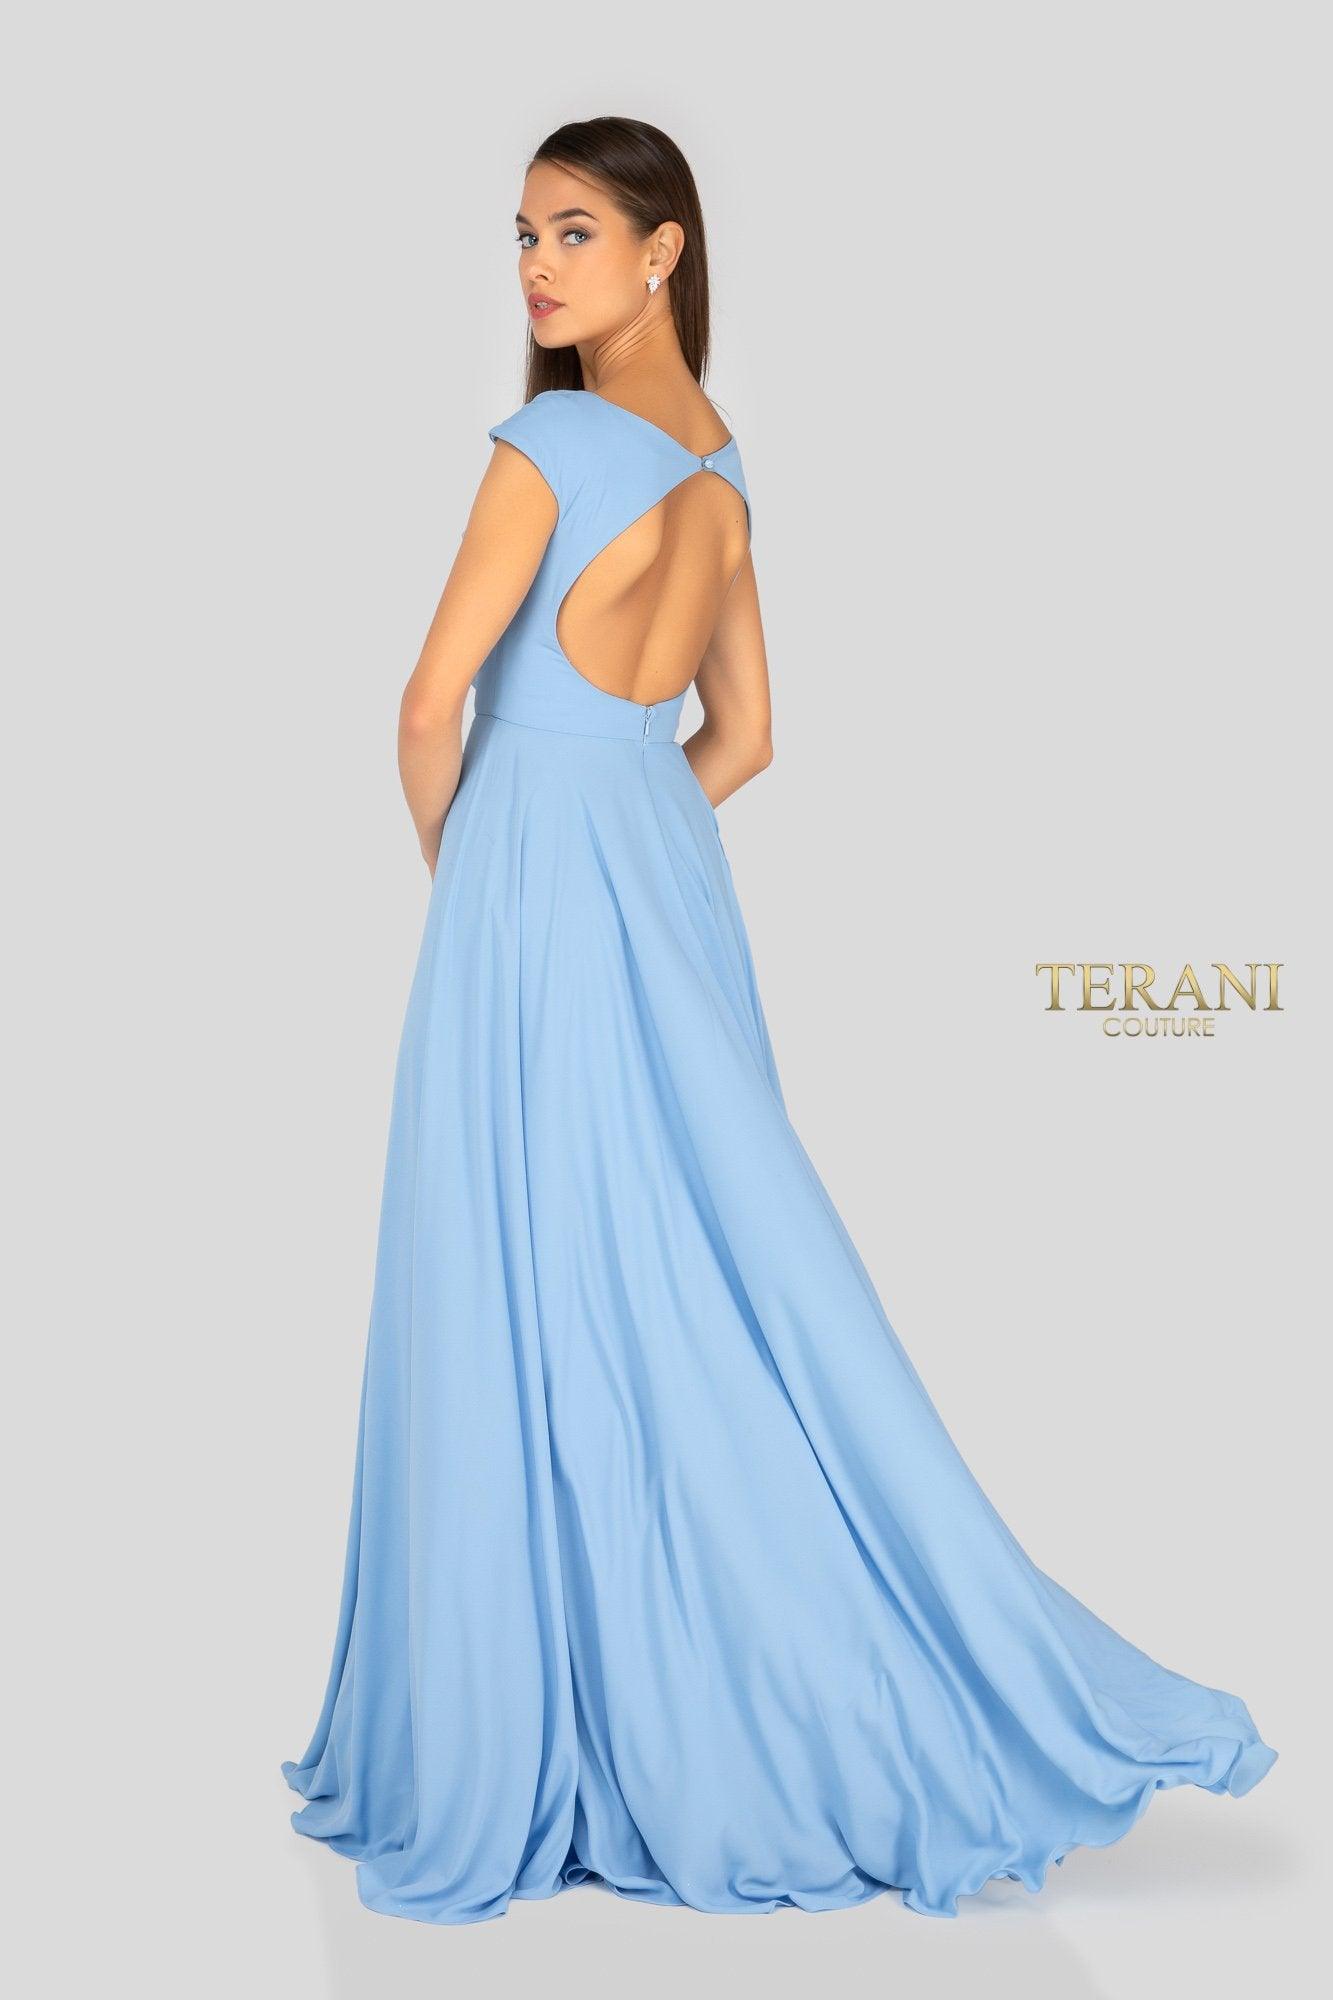 Terani Couture Long Formal Dress 1912B9695 - The Dress Outlet